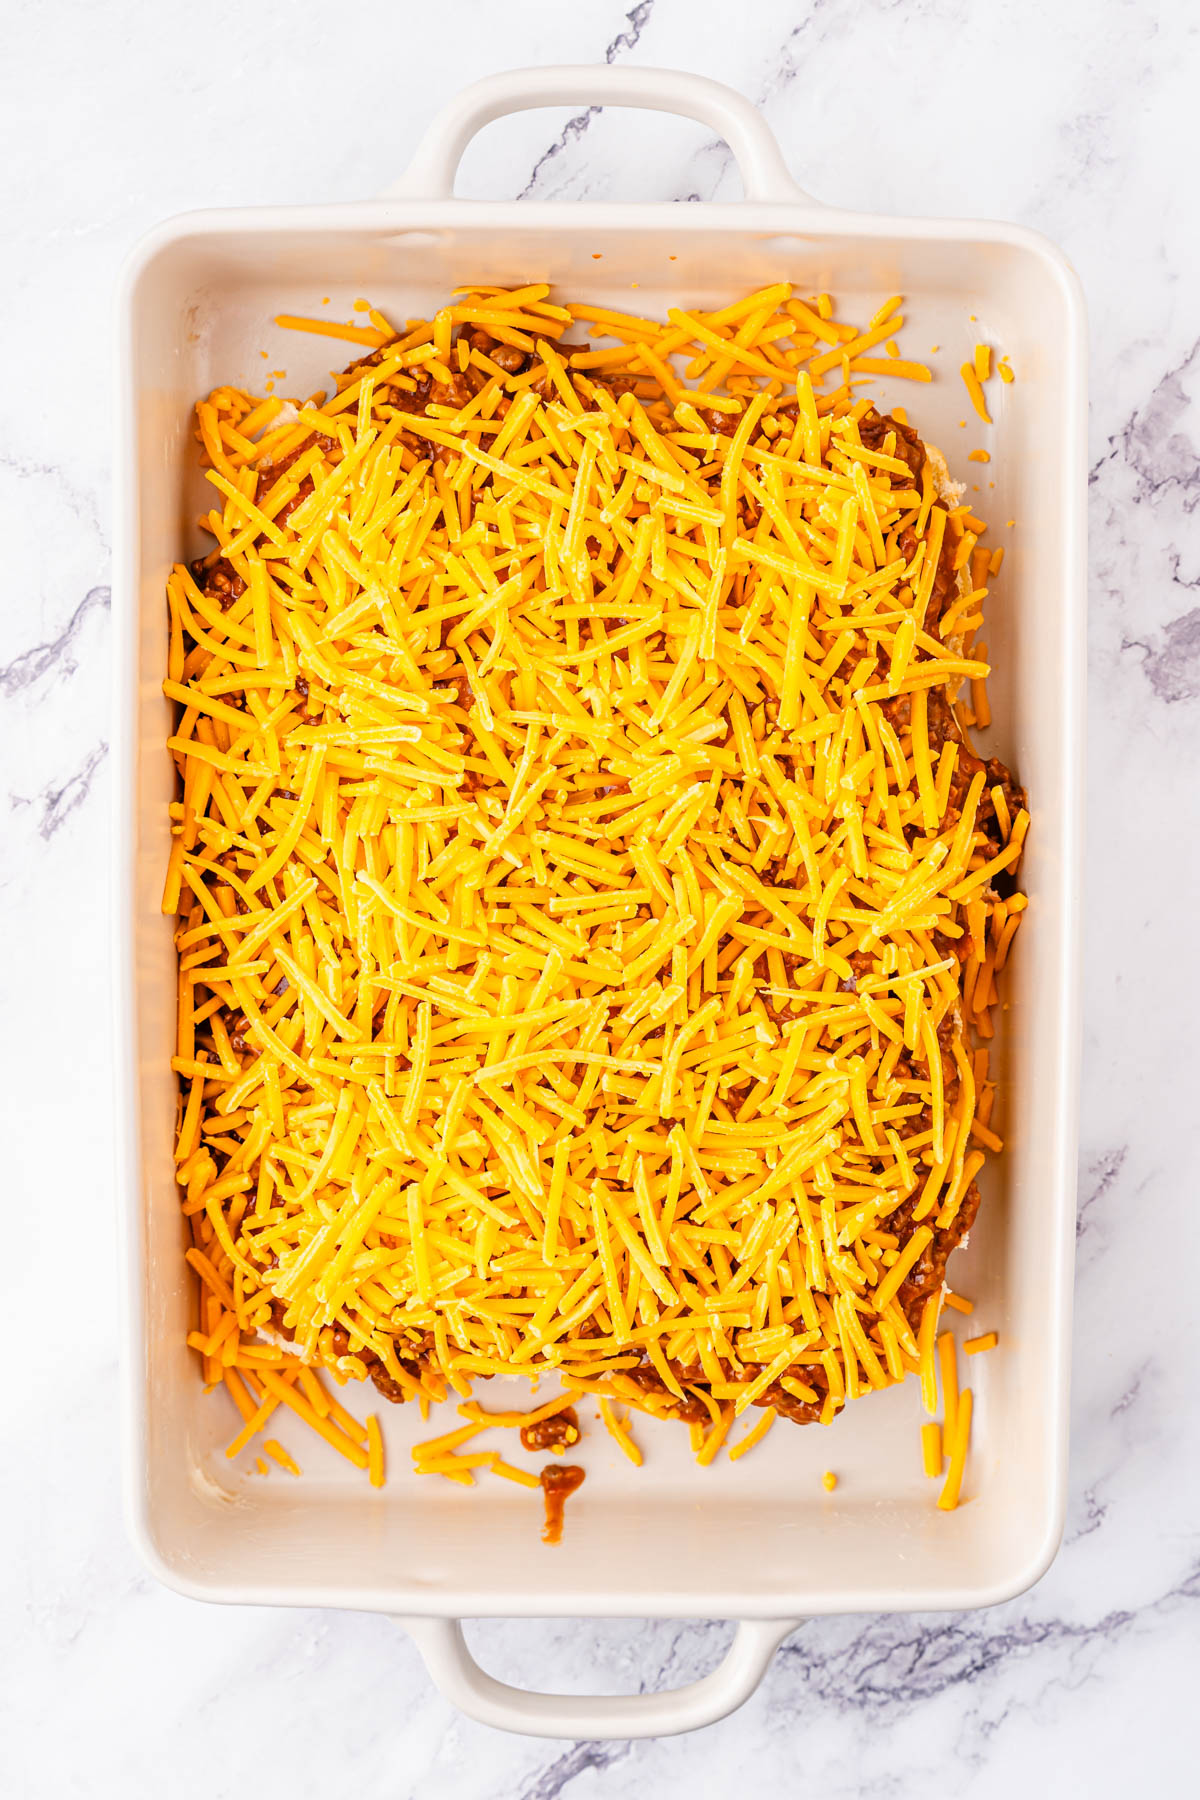 A casserole dish with cheese and meat on buns